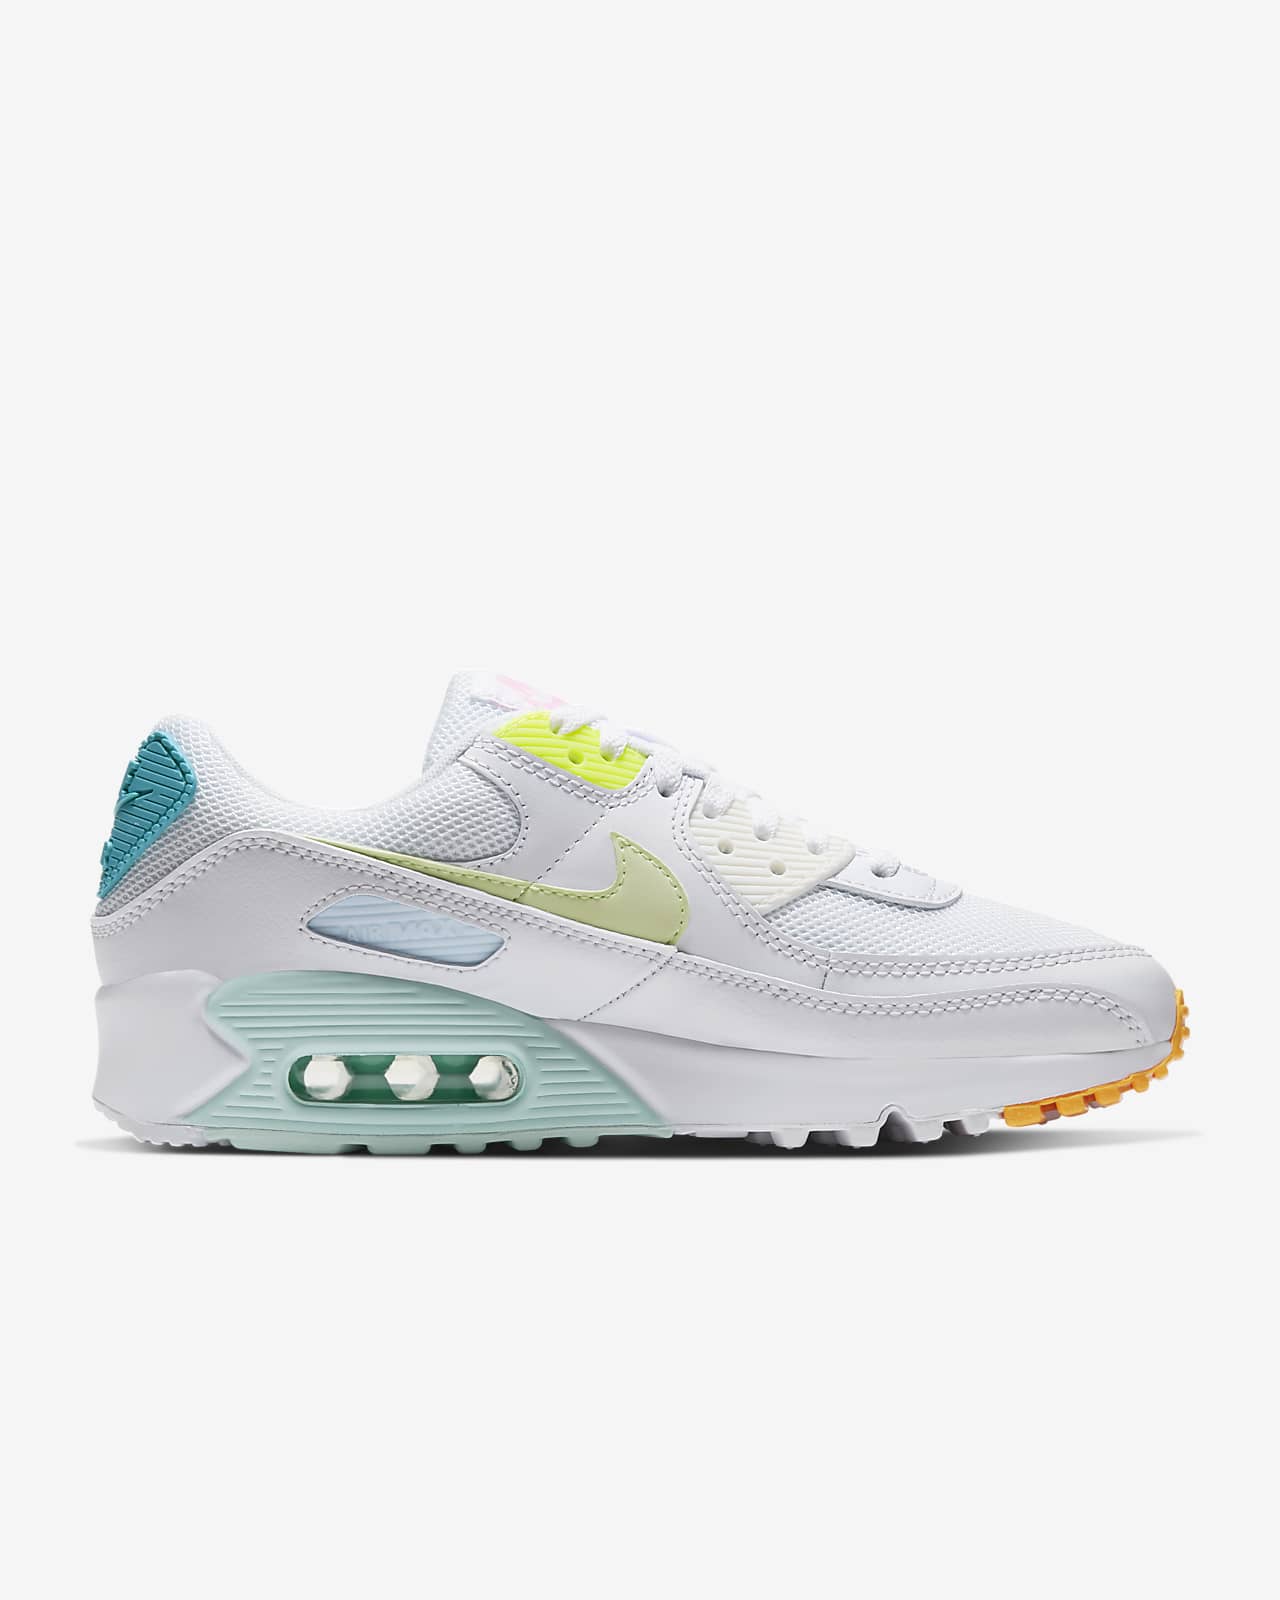 nike air max shoes for ladies